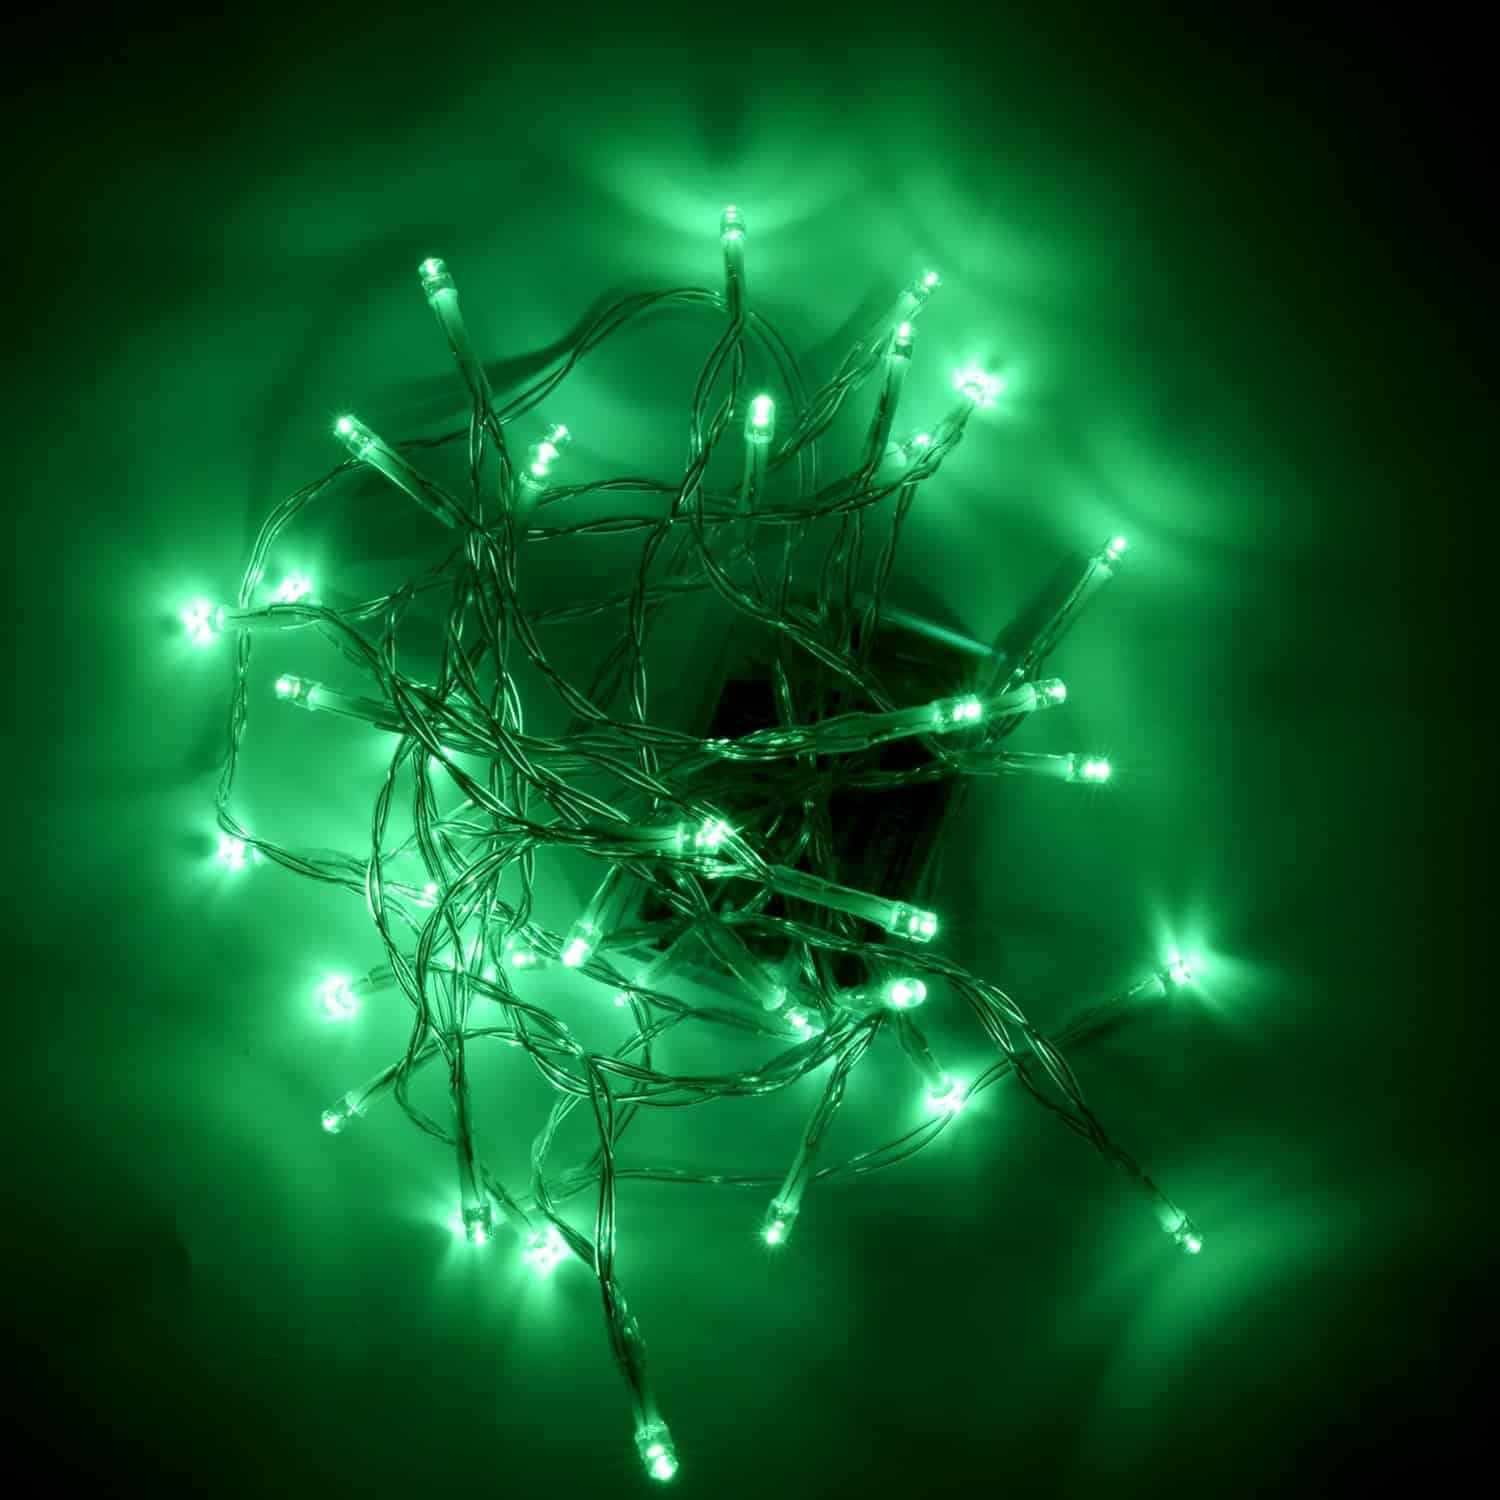 Karlling Battery Operated Christmas Lights,8 Flashing Mode 13 ft Short Clear Wire Led Fairy Light String with Timer for Small Mini Xmas Tree and Wedding Party Indoor/Outdoor Decoration (White, 1Pack)